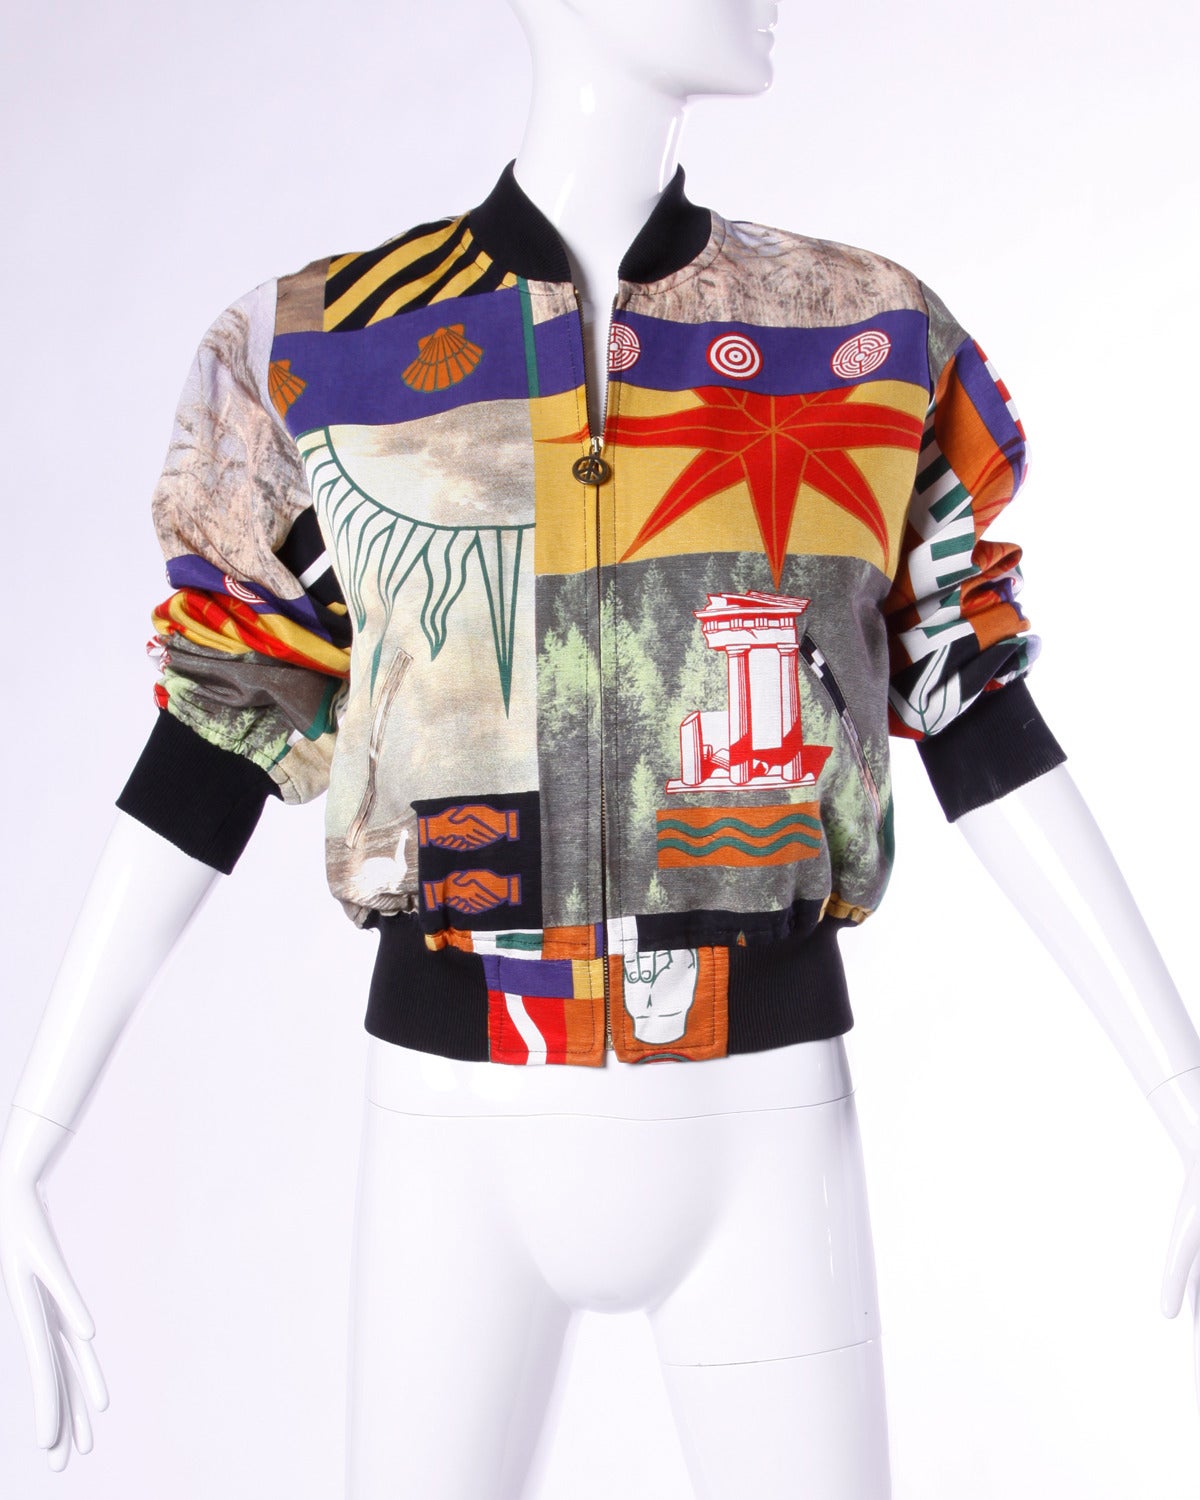 Vintage bomber jacket featuring a collage of photo and graphic prints by Moschino. Timeless iconic design and rare collector's piece! This jacket zips up the front with a metal zipper and peace sign pull.

Details:

Fully Lined
Front Metal Zip